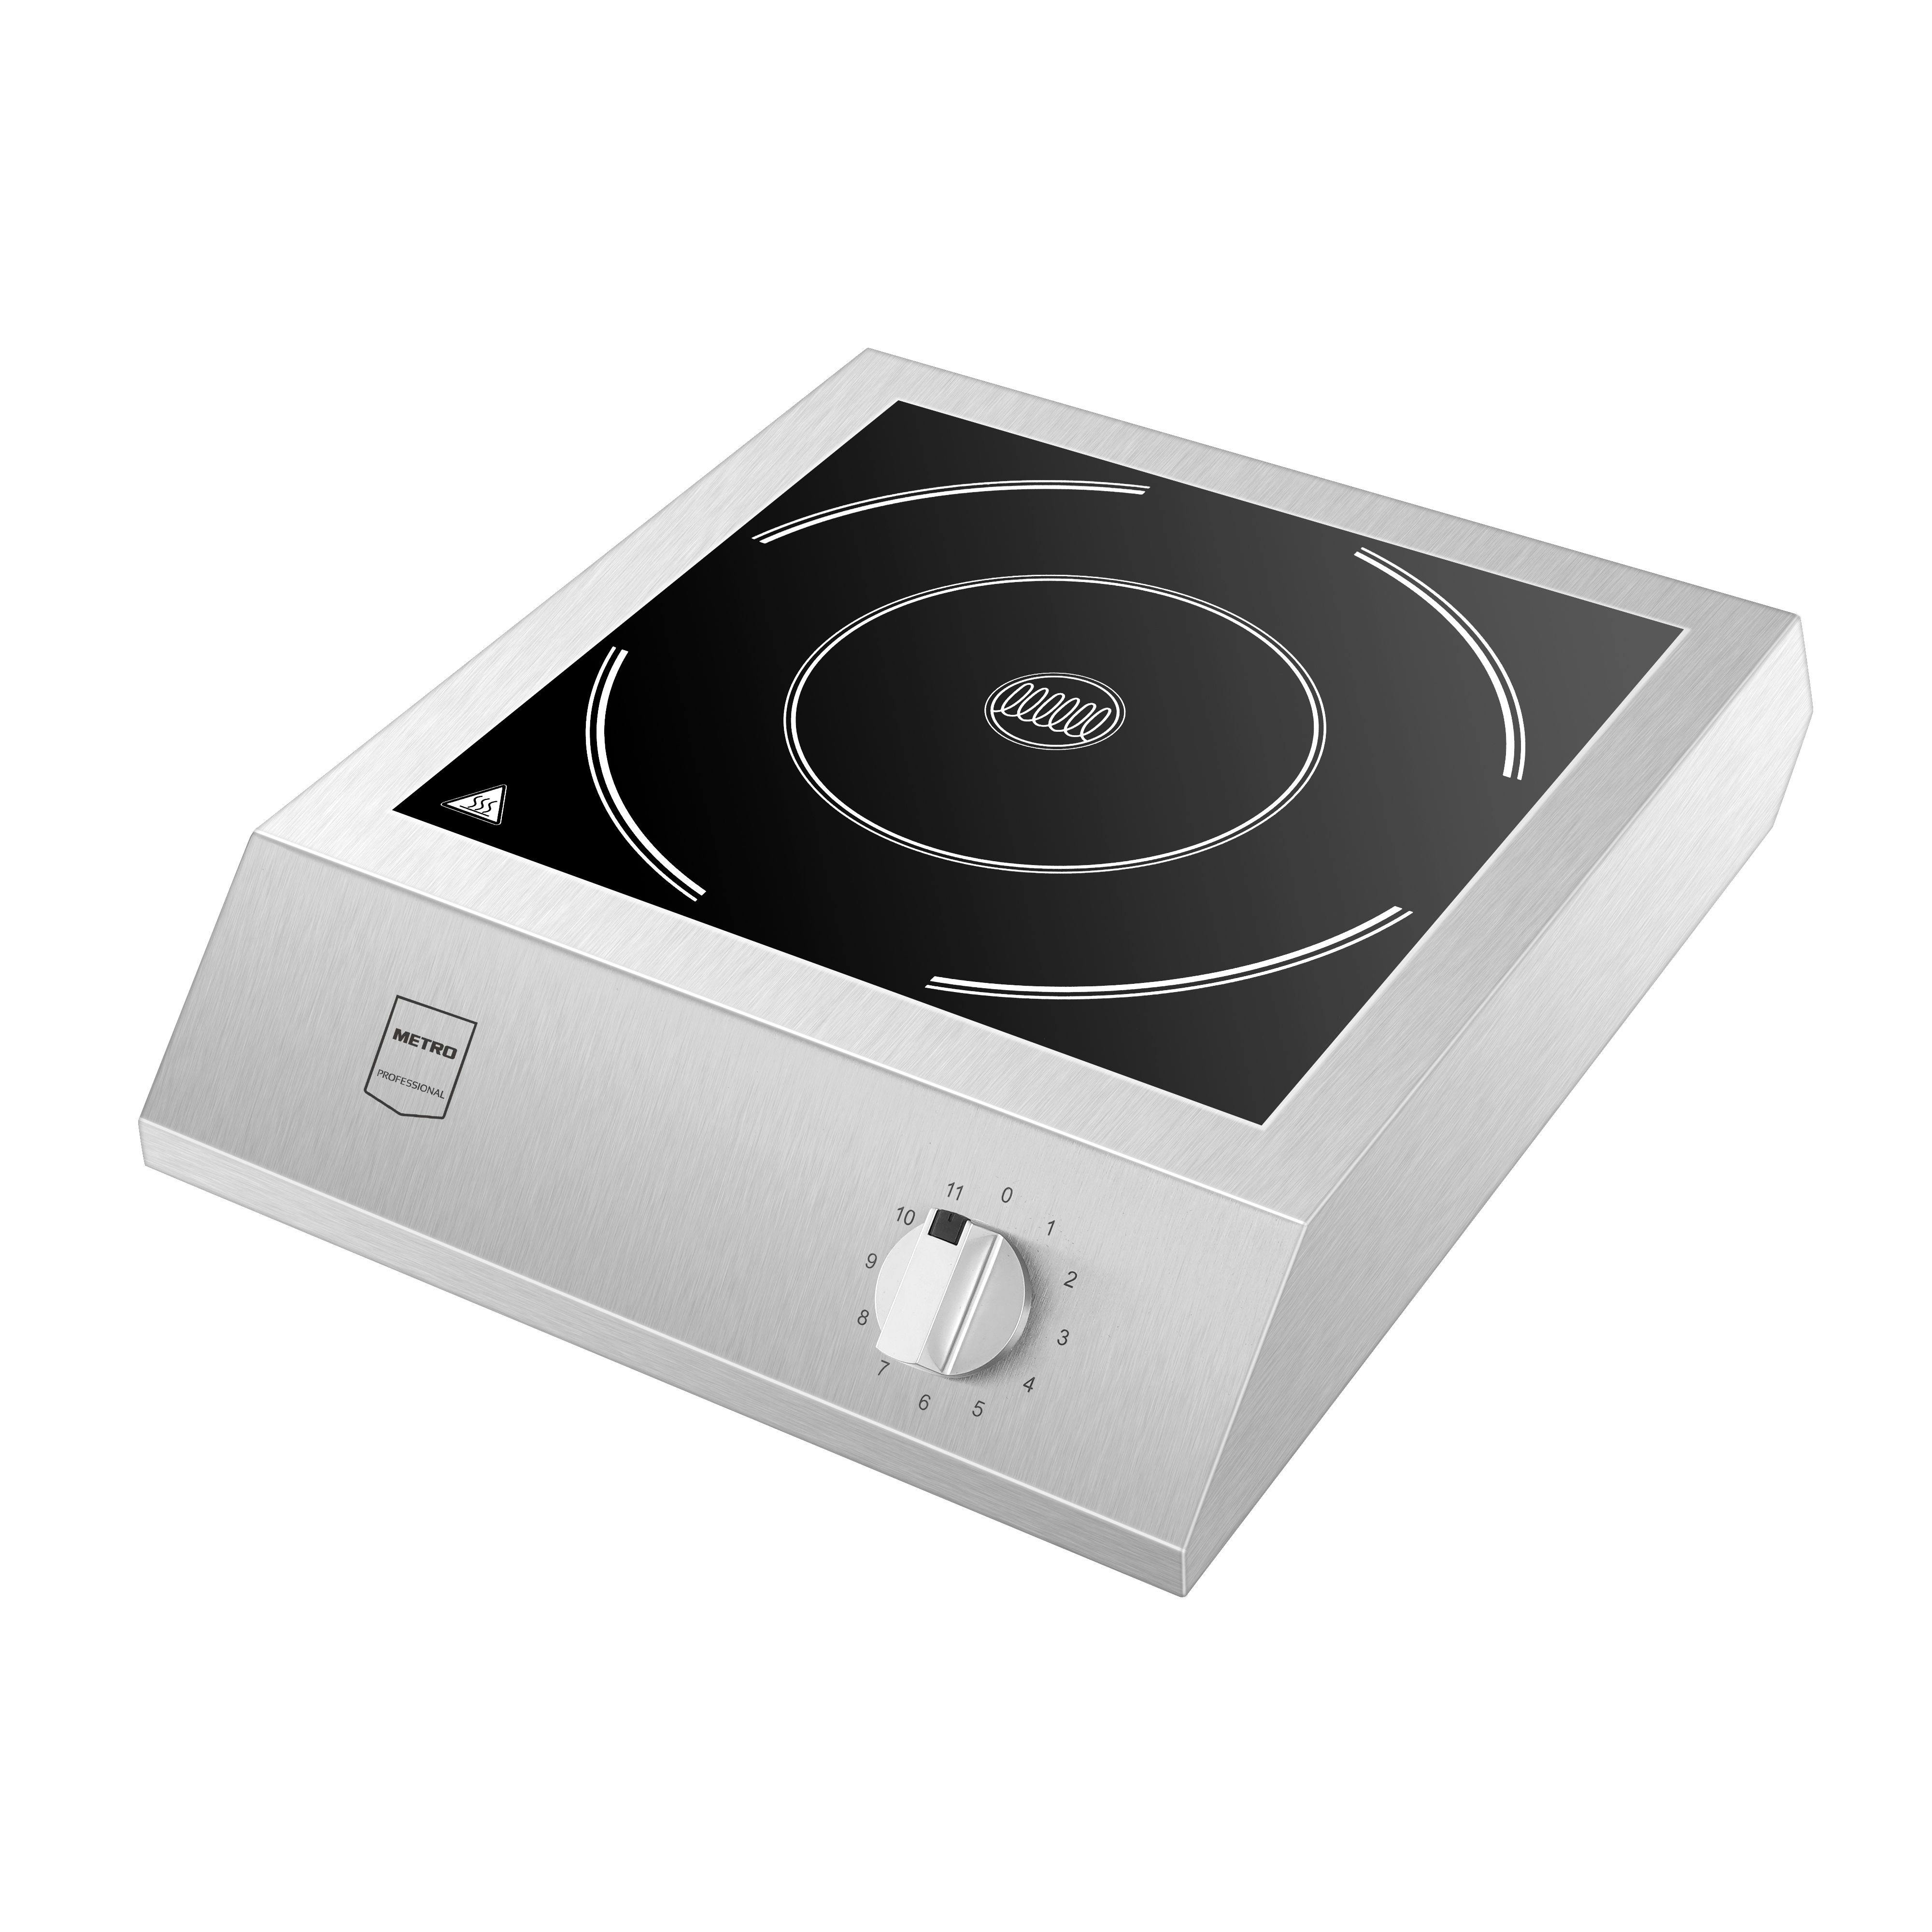 METRO Professional Induction Cooker GIC3500 